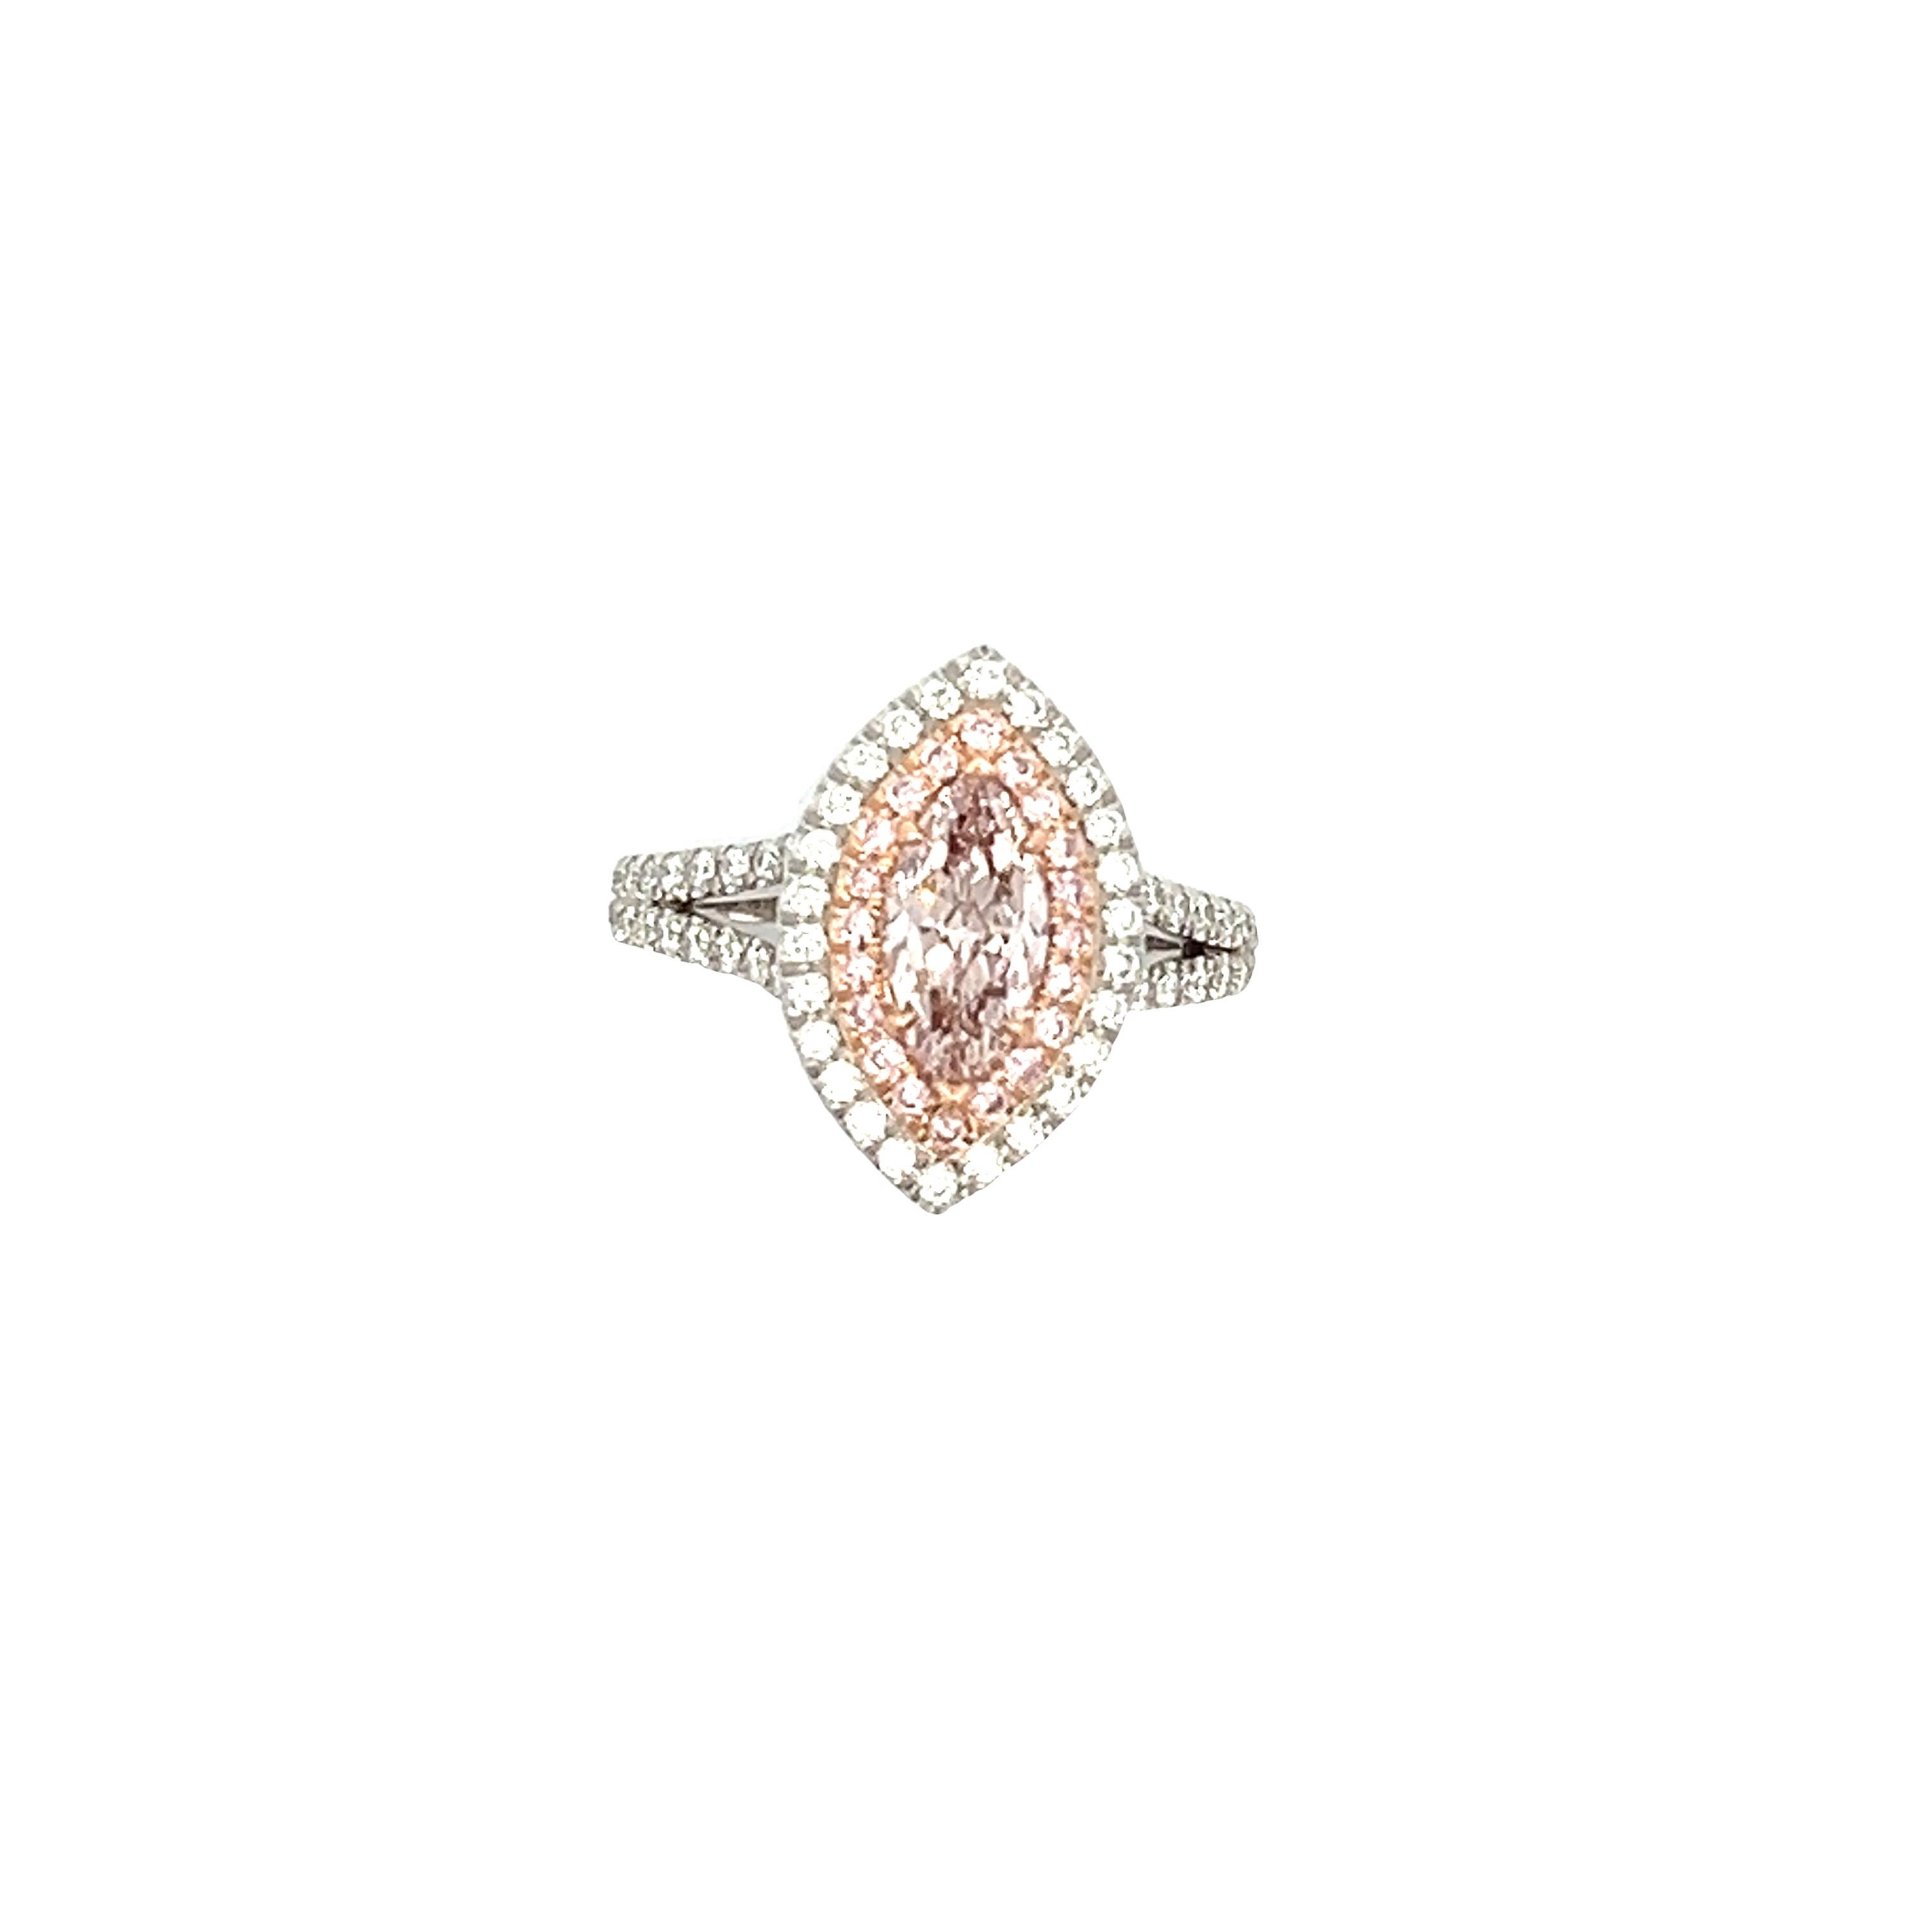 Behold this magnificent handmade Diamond Ring, featuring a stunning 1.01-carat Fancy Light Pink Marquise Modified Brilliant shaped Diamond with SI1 clarity. This awe-inspiring masterpiece is surrounded by 0.16 carats of Natural Pink Round-cut